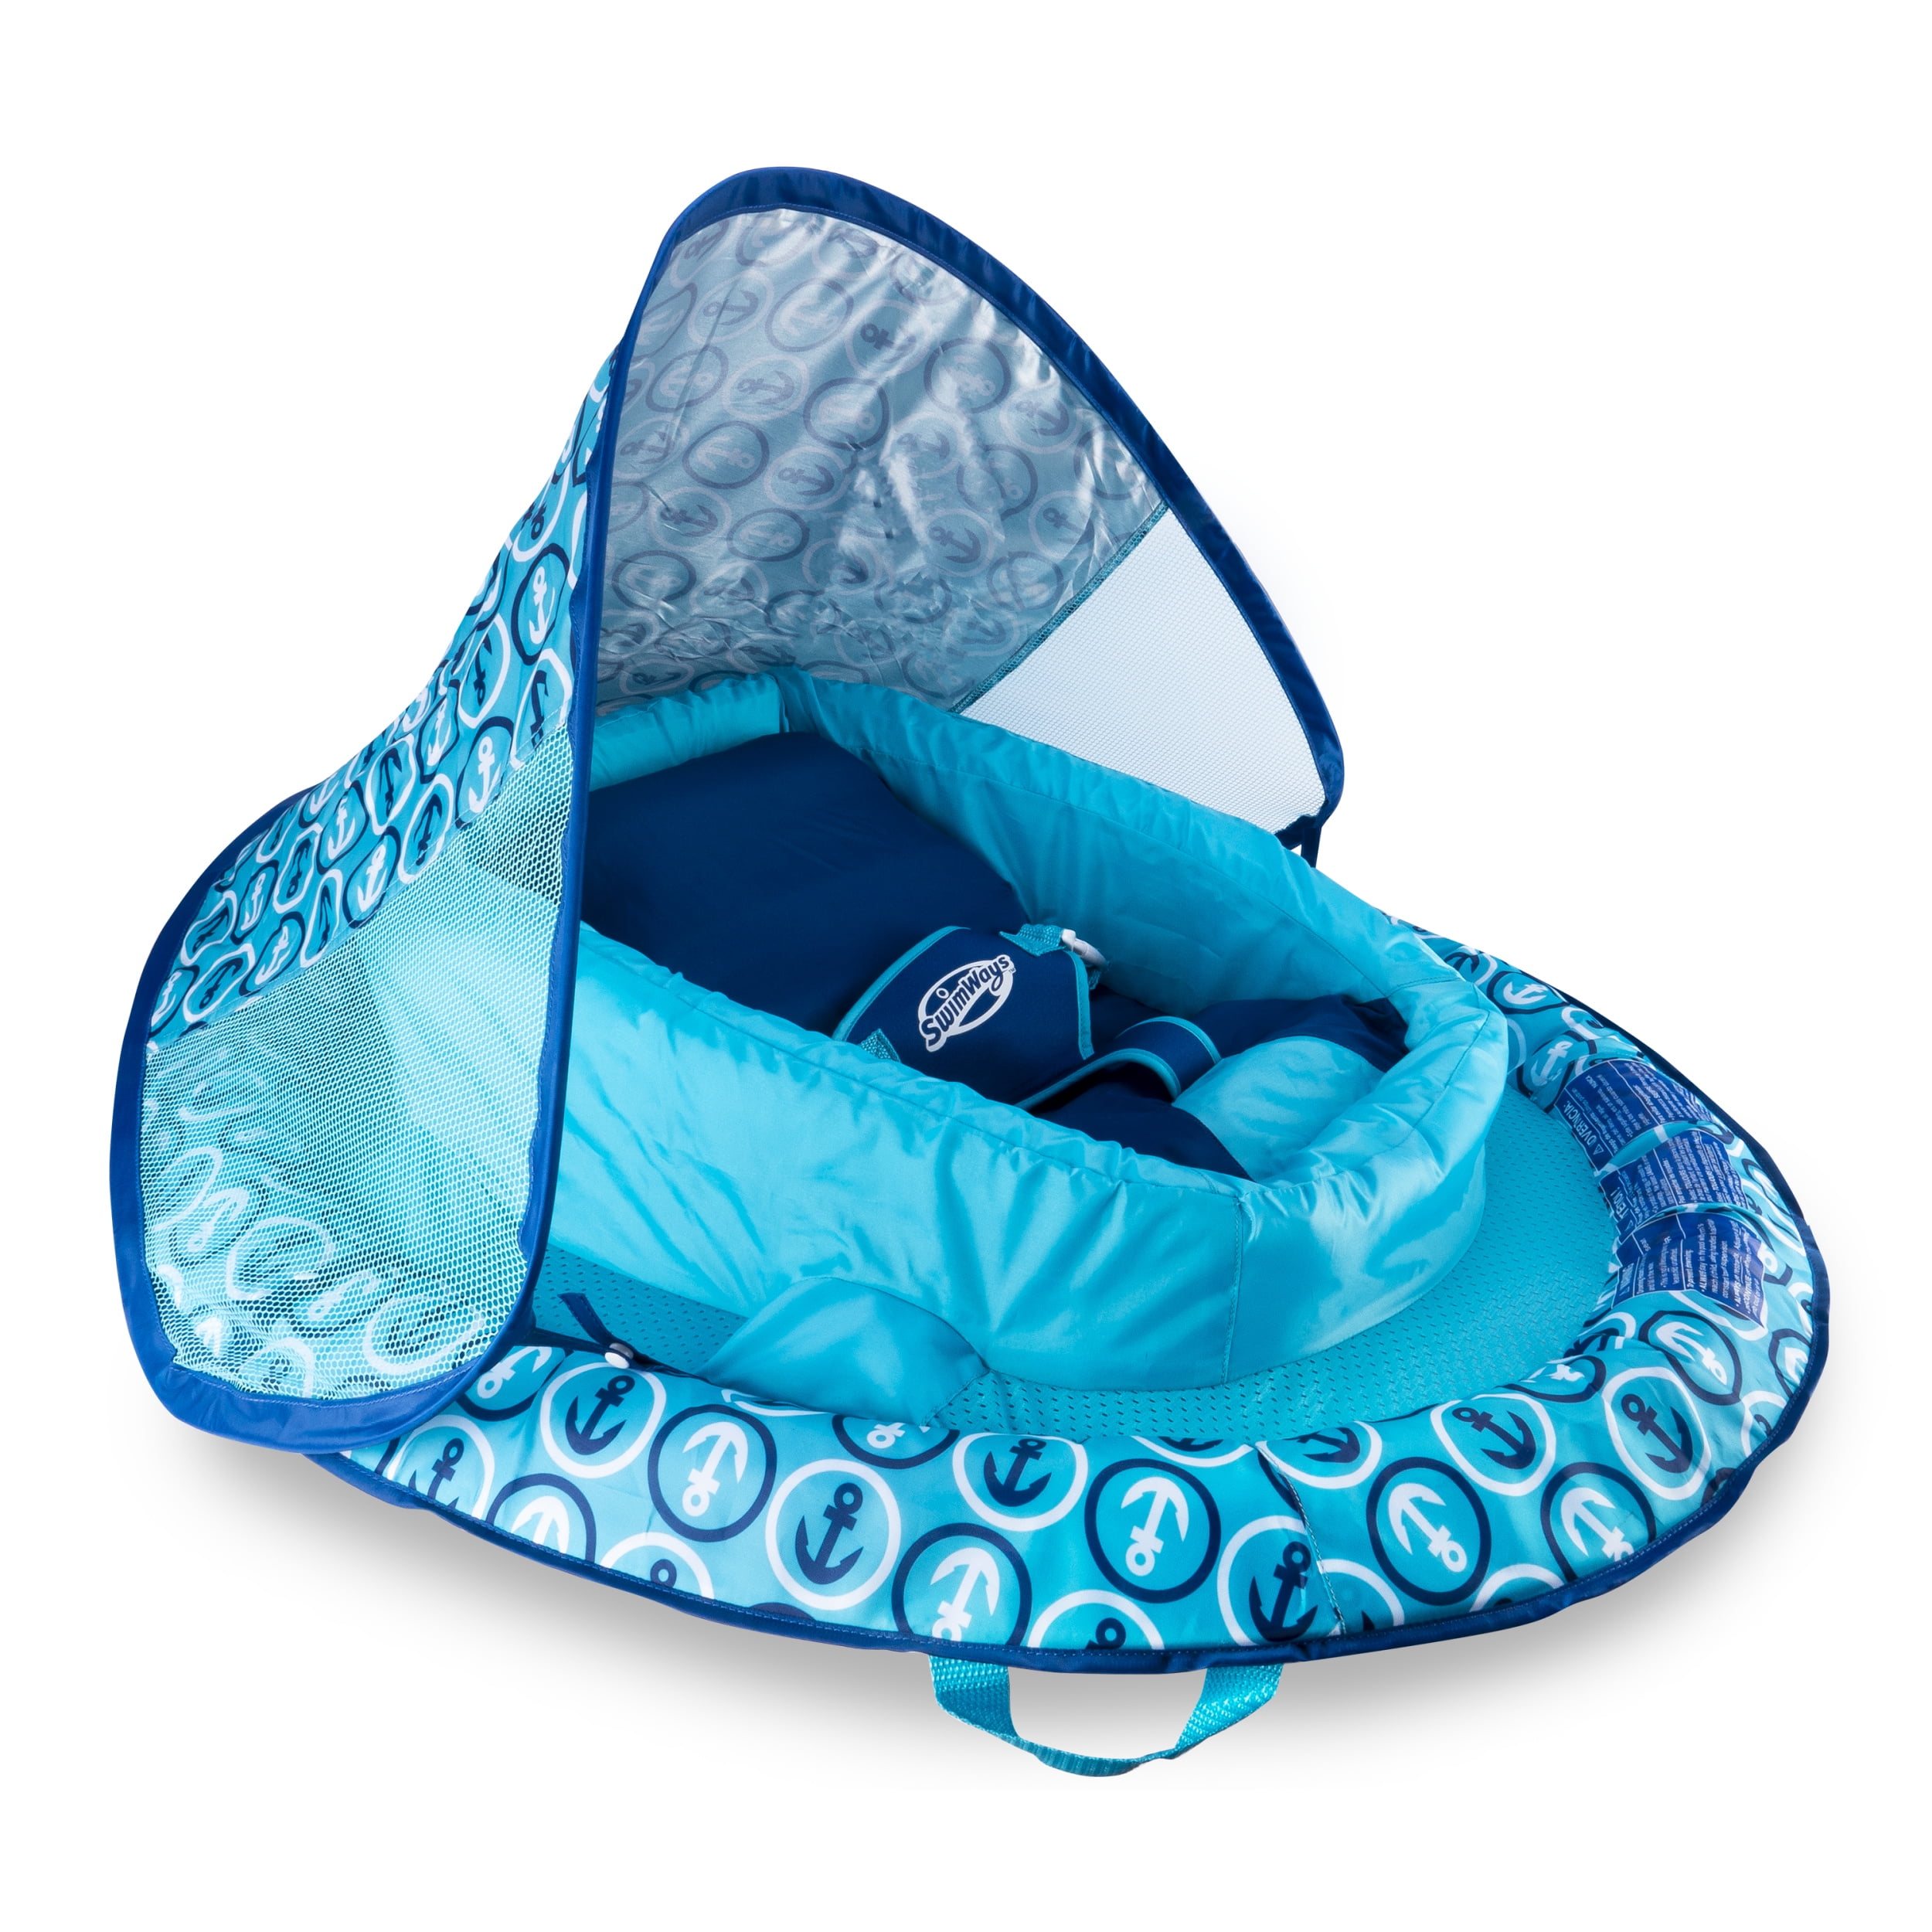 SwimWays Sun Canopy Baby Boat Swim Step 1 Inflatable Float 9 to 24 Months 11875 for sale online 